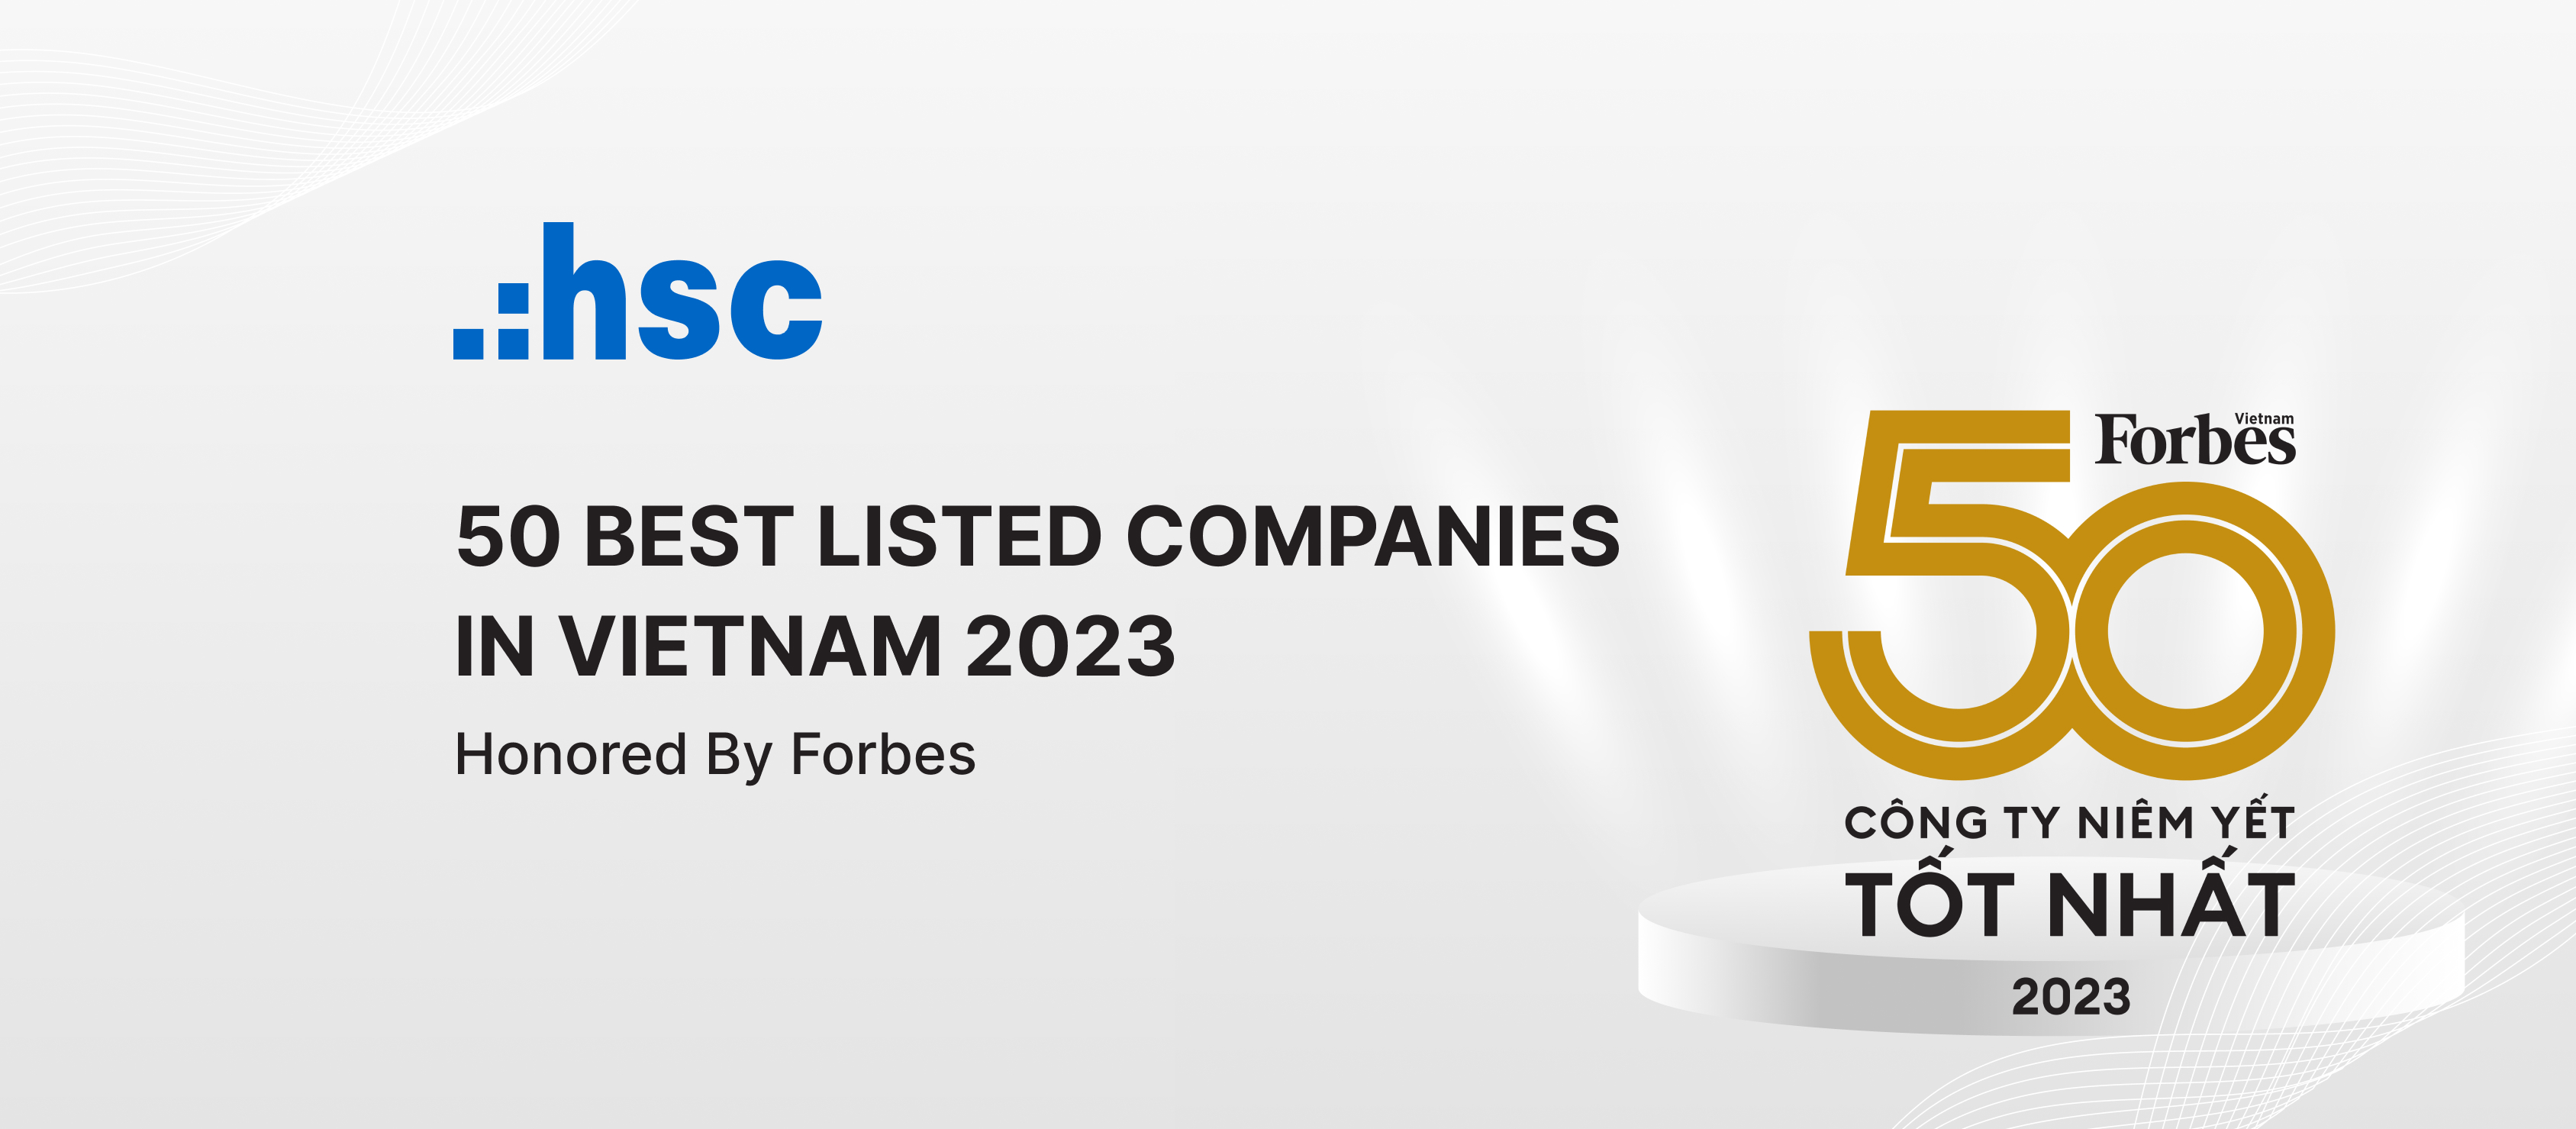 HSC – 50 Best listed Companies in Vietnam 2023 - Honored by Forbes Vietnam